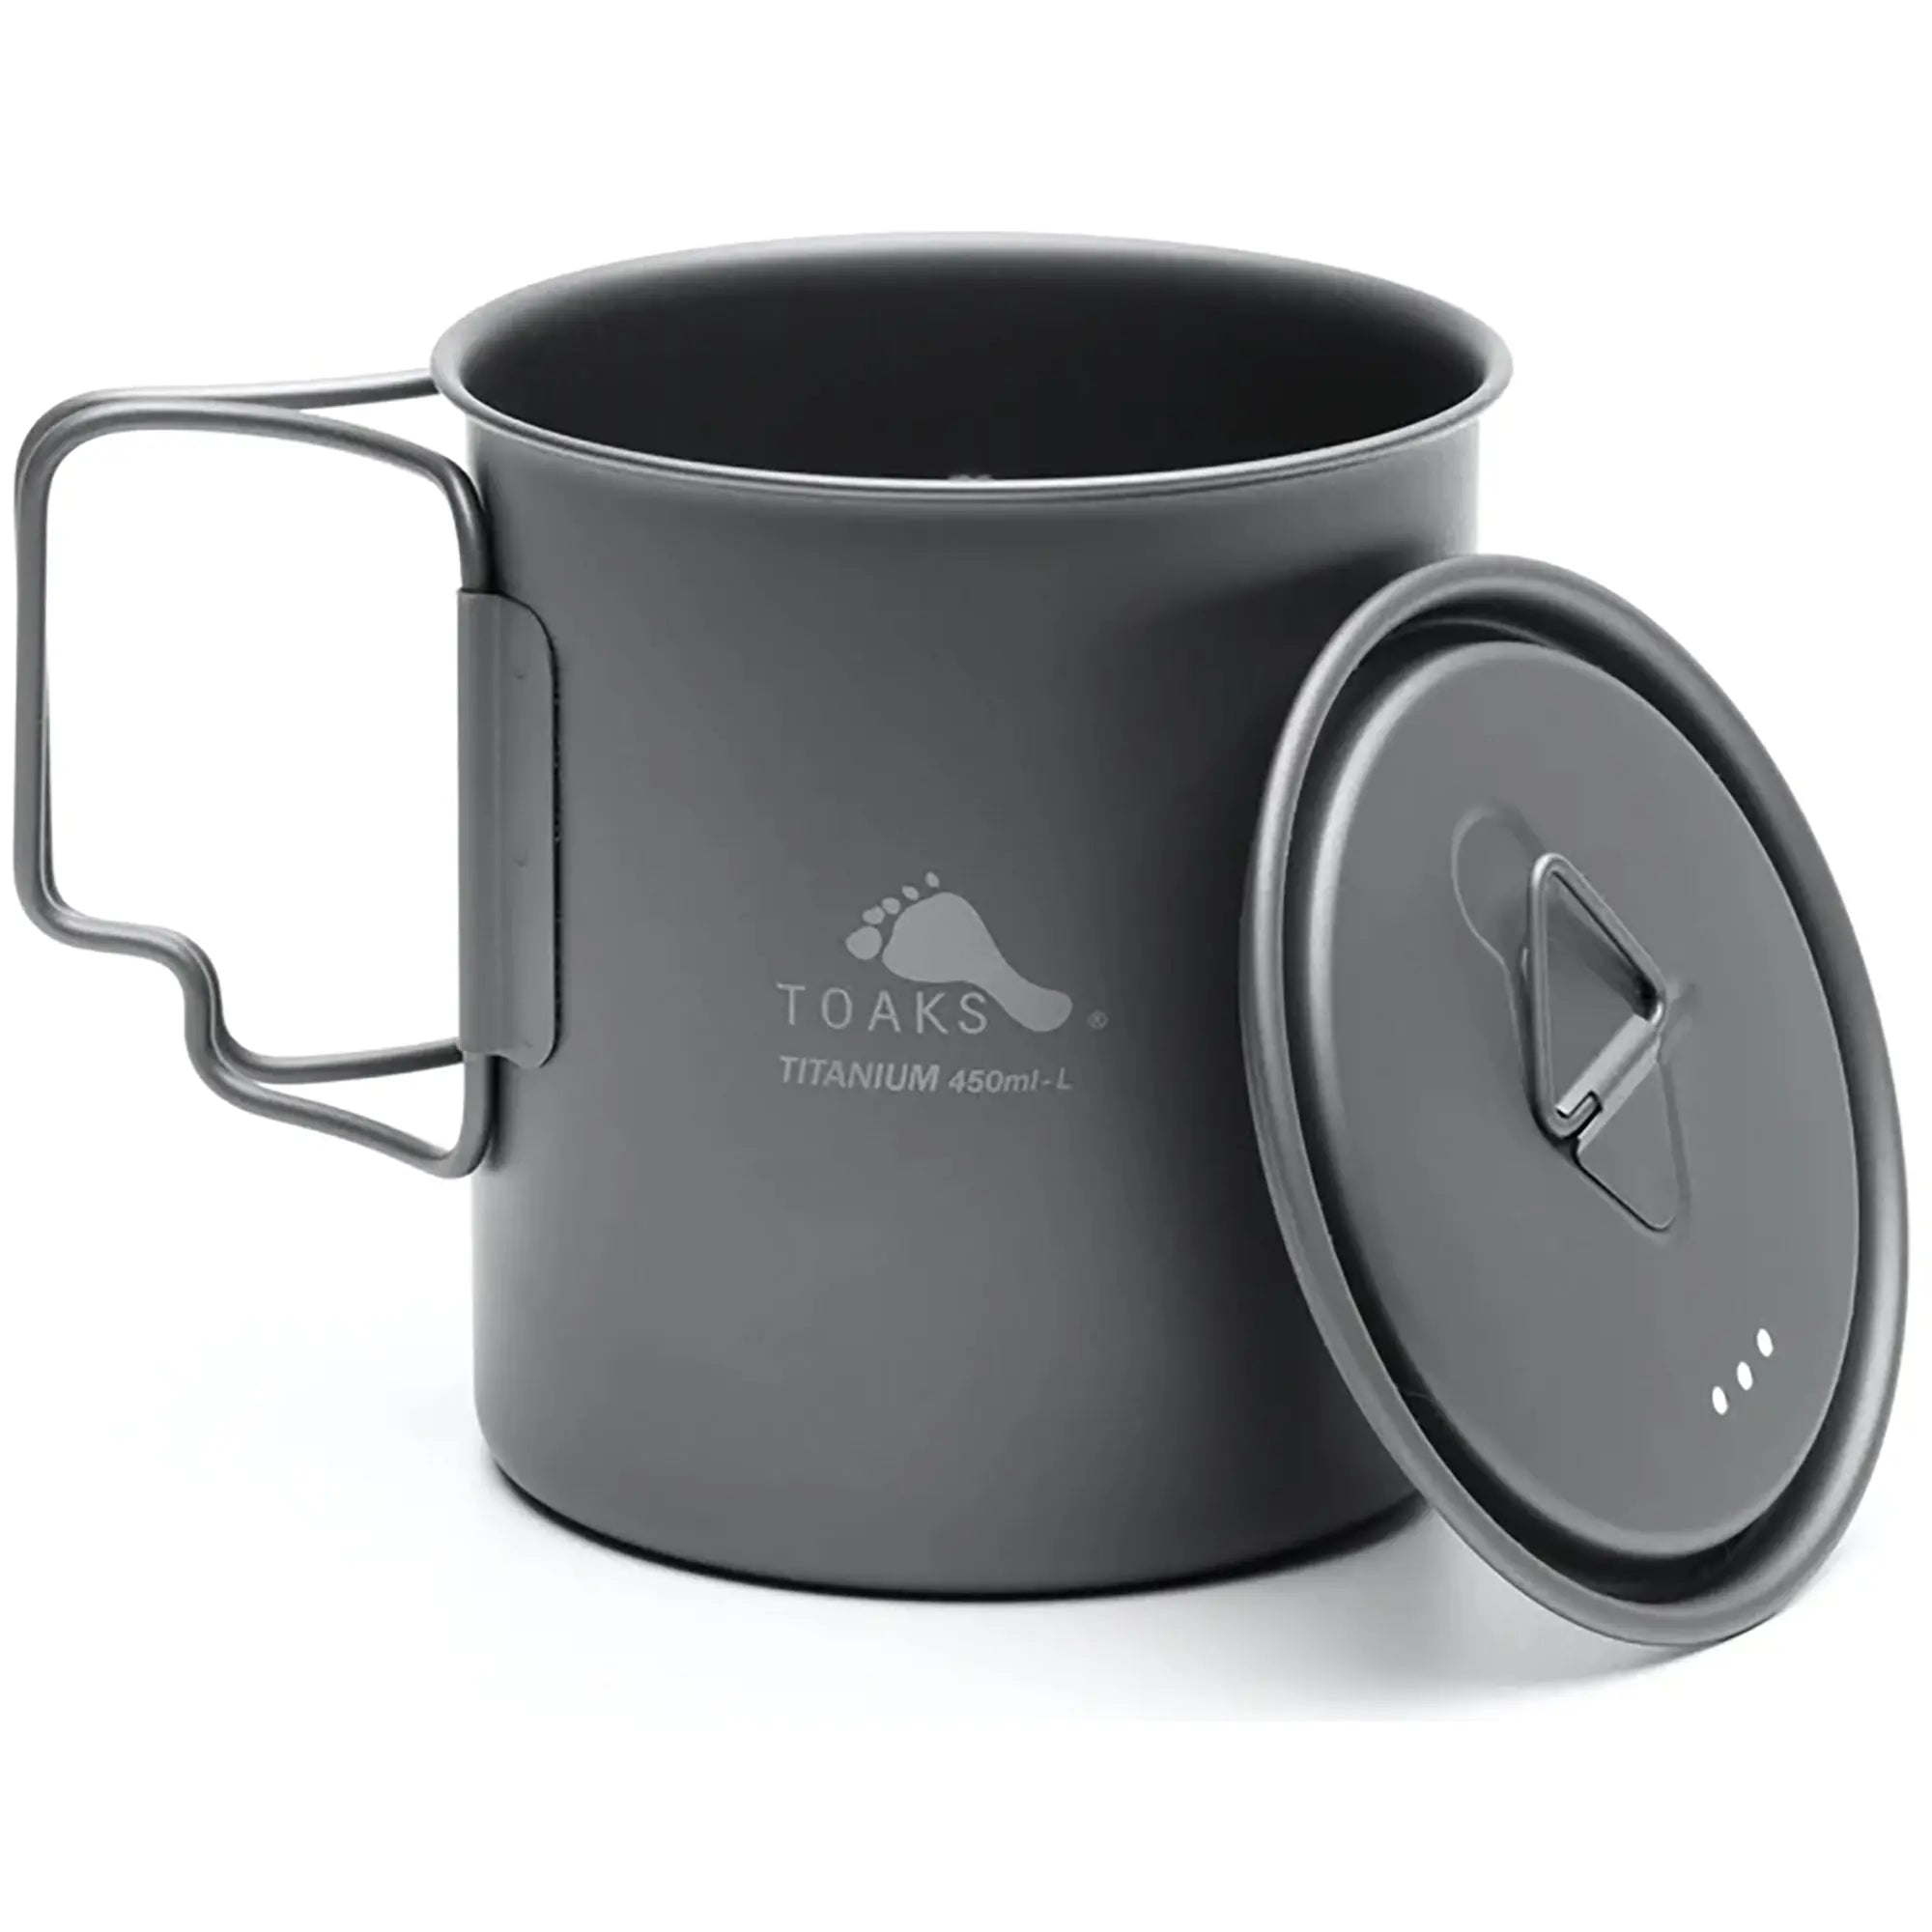 TOAKS 450ml Ultralight Titanium Cup with Lid - CUPLID450 - Outdoor Camping TOAKS